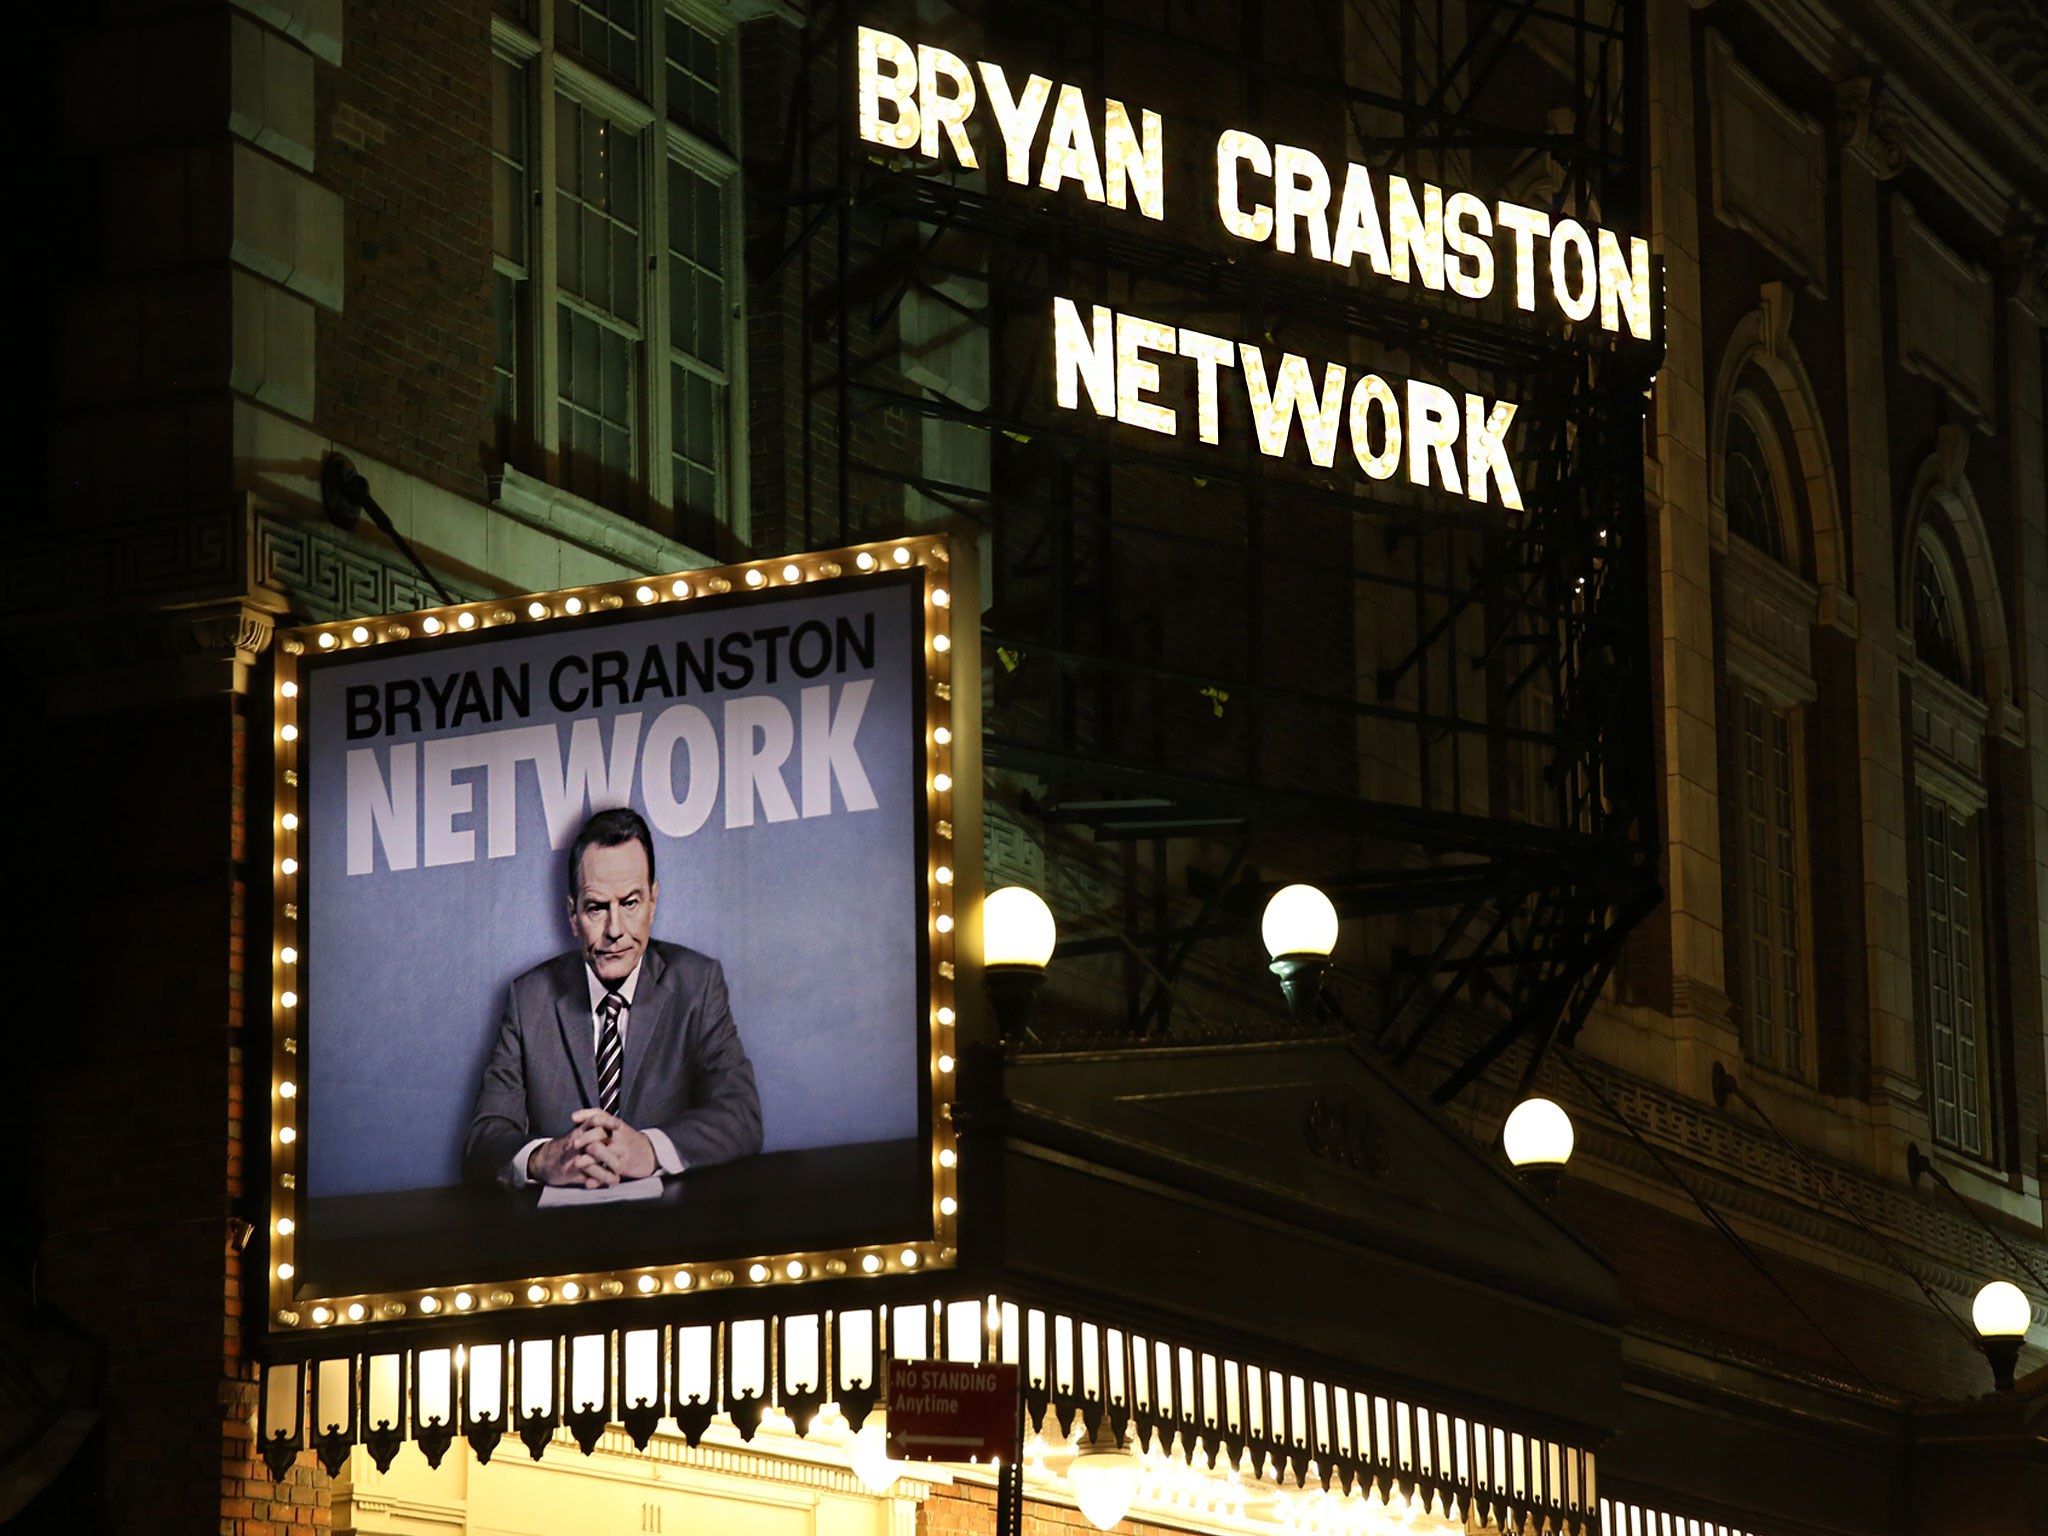 The Network at the Belasco Theatre